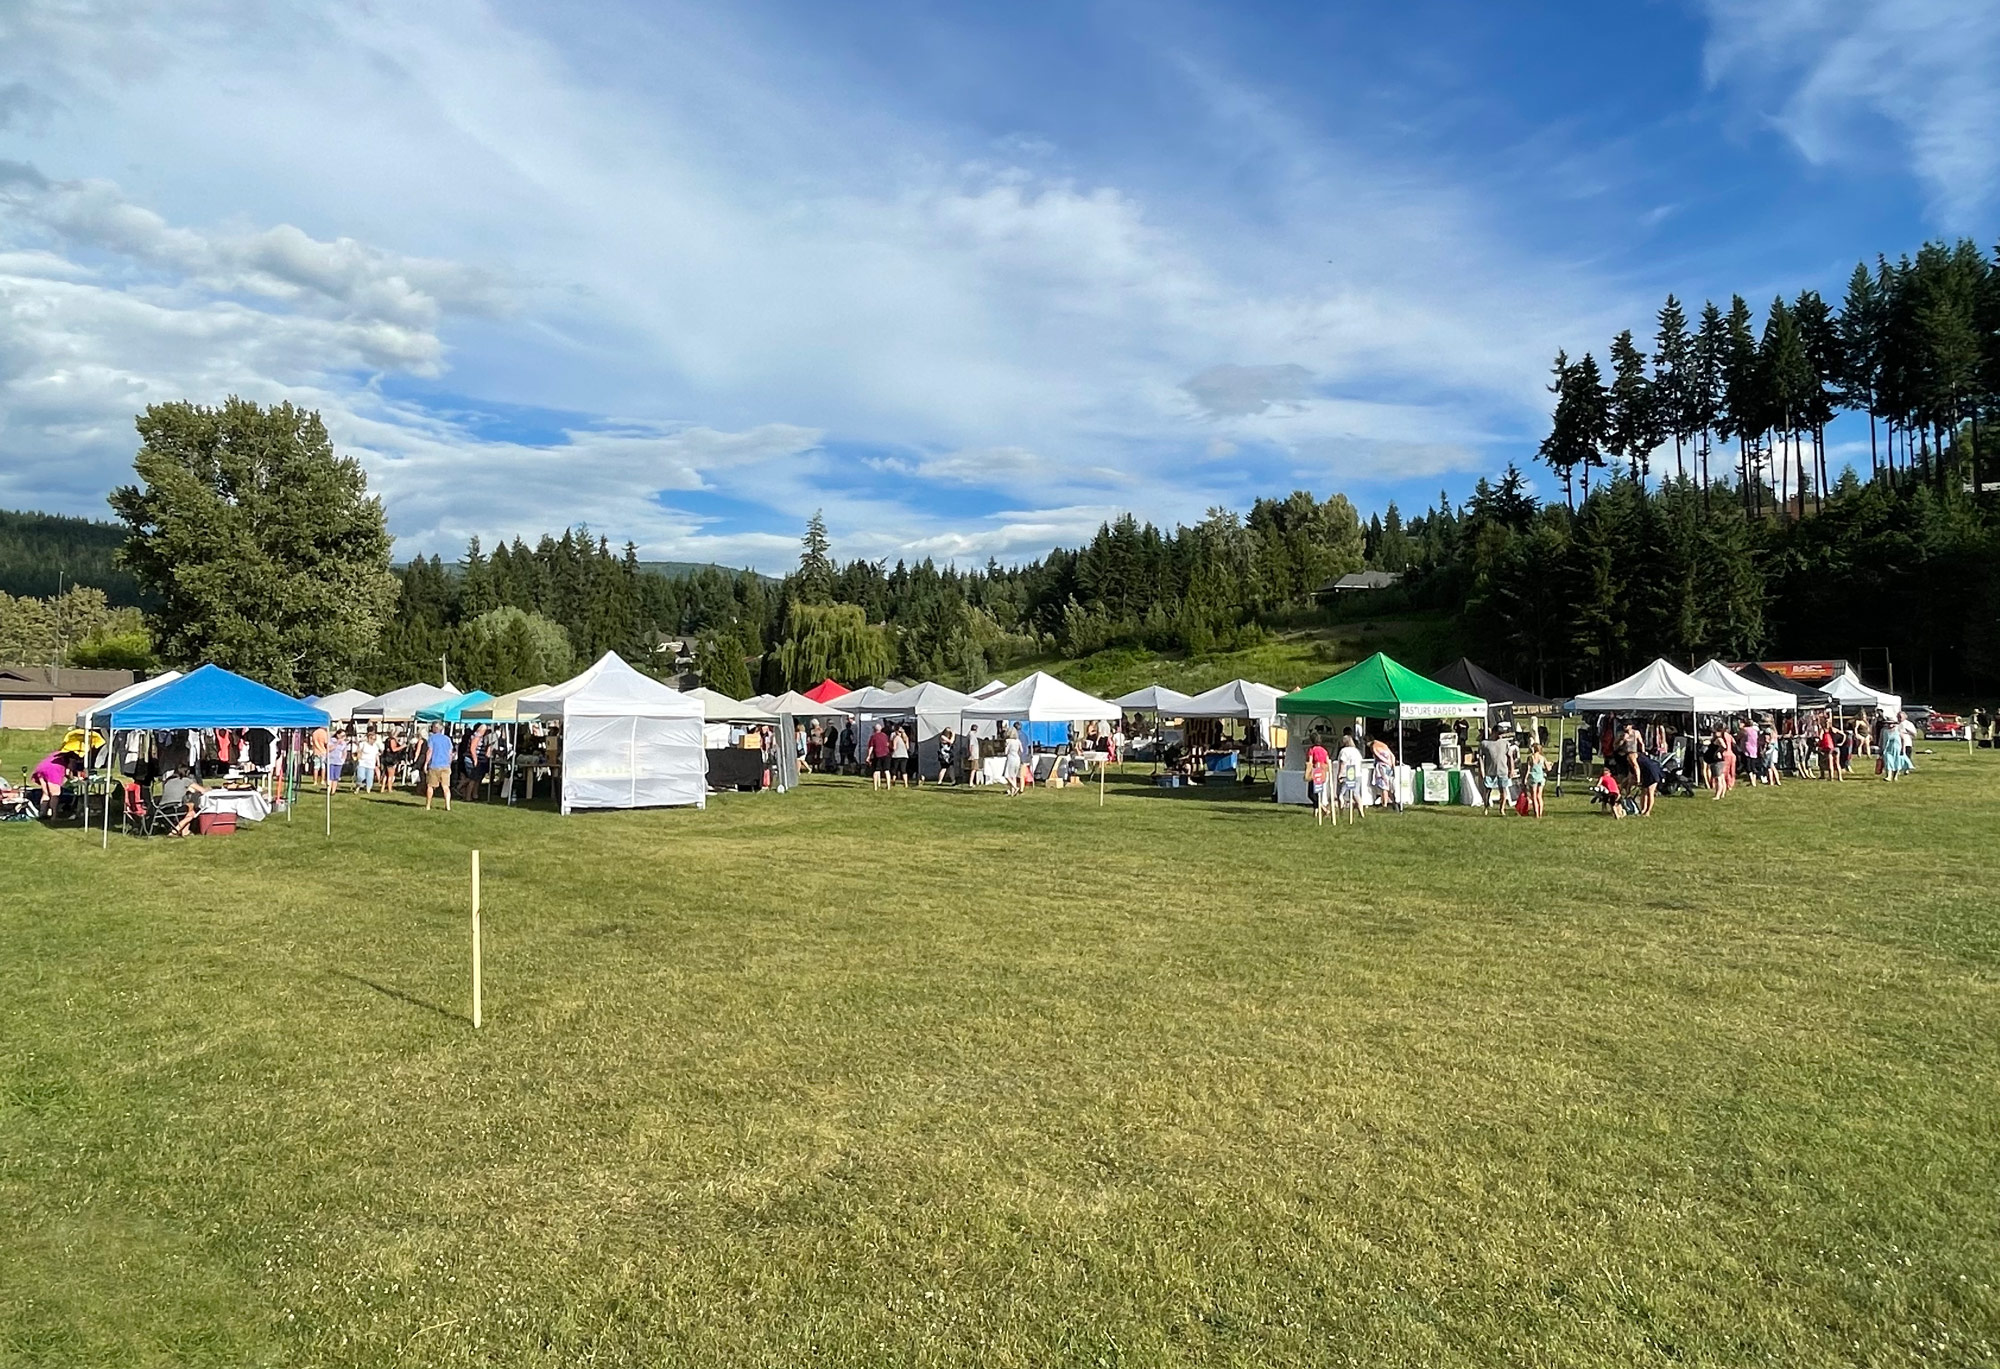 Market by the Bay: Market by the Bay takes place in Blind Bay, every Thursday evening from June to September. The community event features fantastic live music, local vendors, and a huge variety of […]